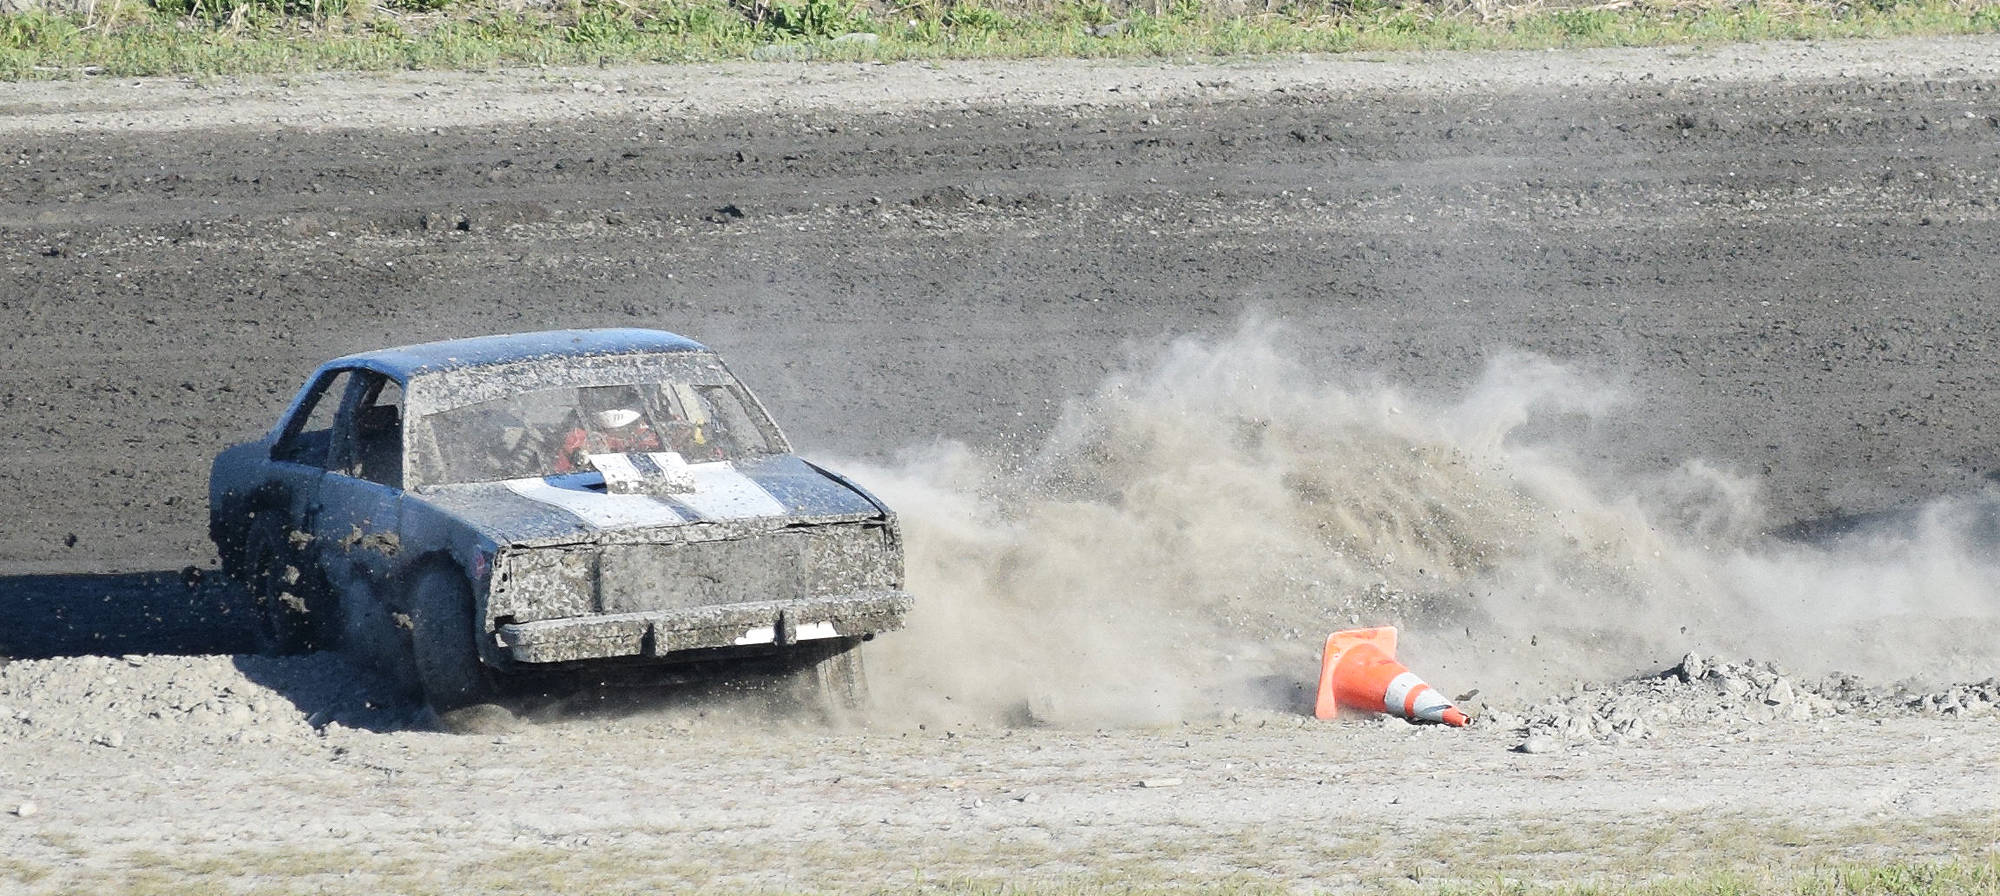 Jackson Kahn spins out during an A-Stock heat race Saturday night at Twin City Raceway in Kenai. (Photo by Joey Klecka/Peninsula Clarion)